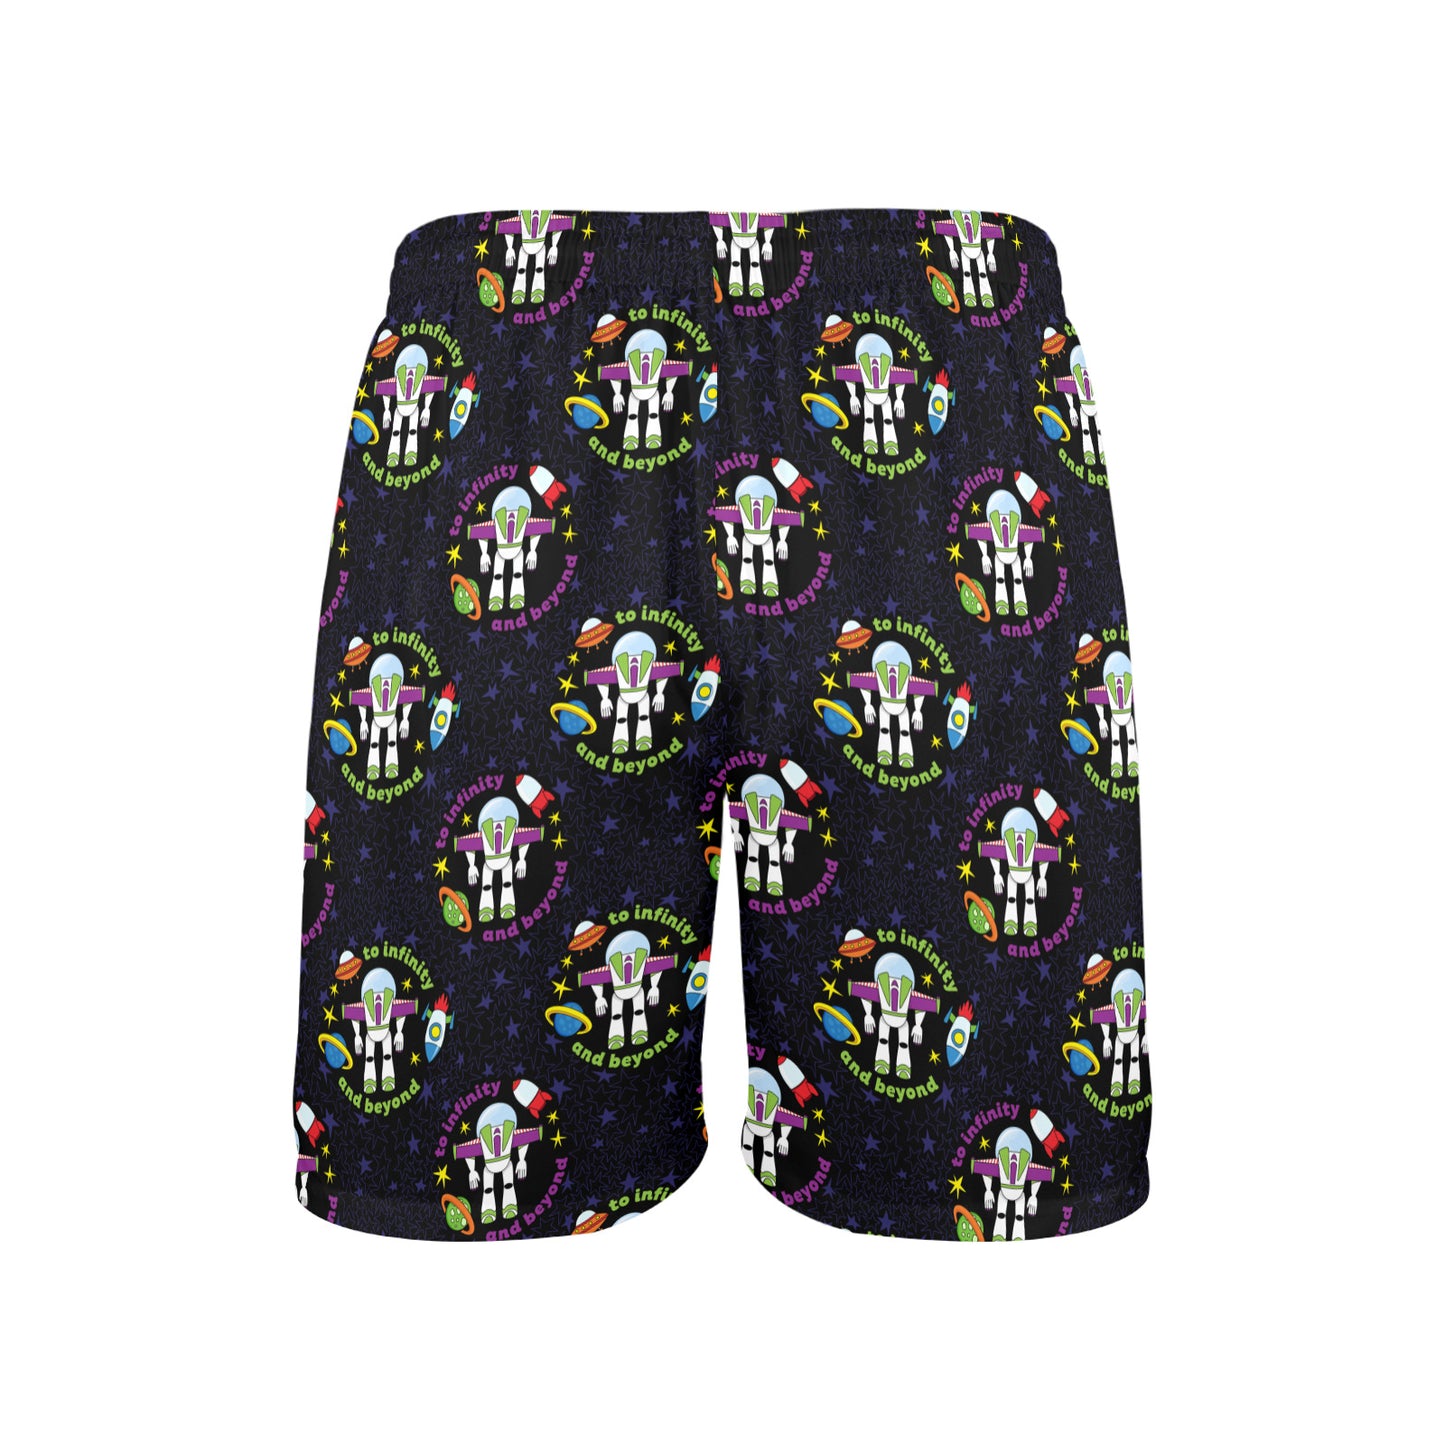 To Infinity And Beyond Men's Swim Trunks Swimsuit